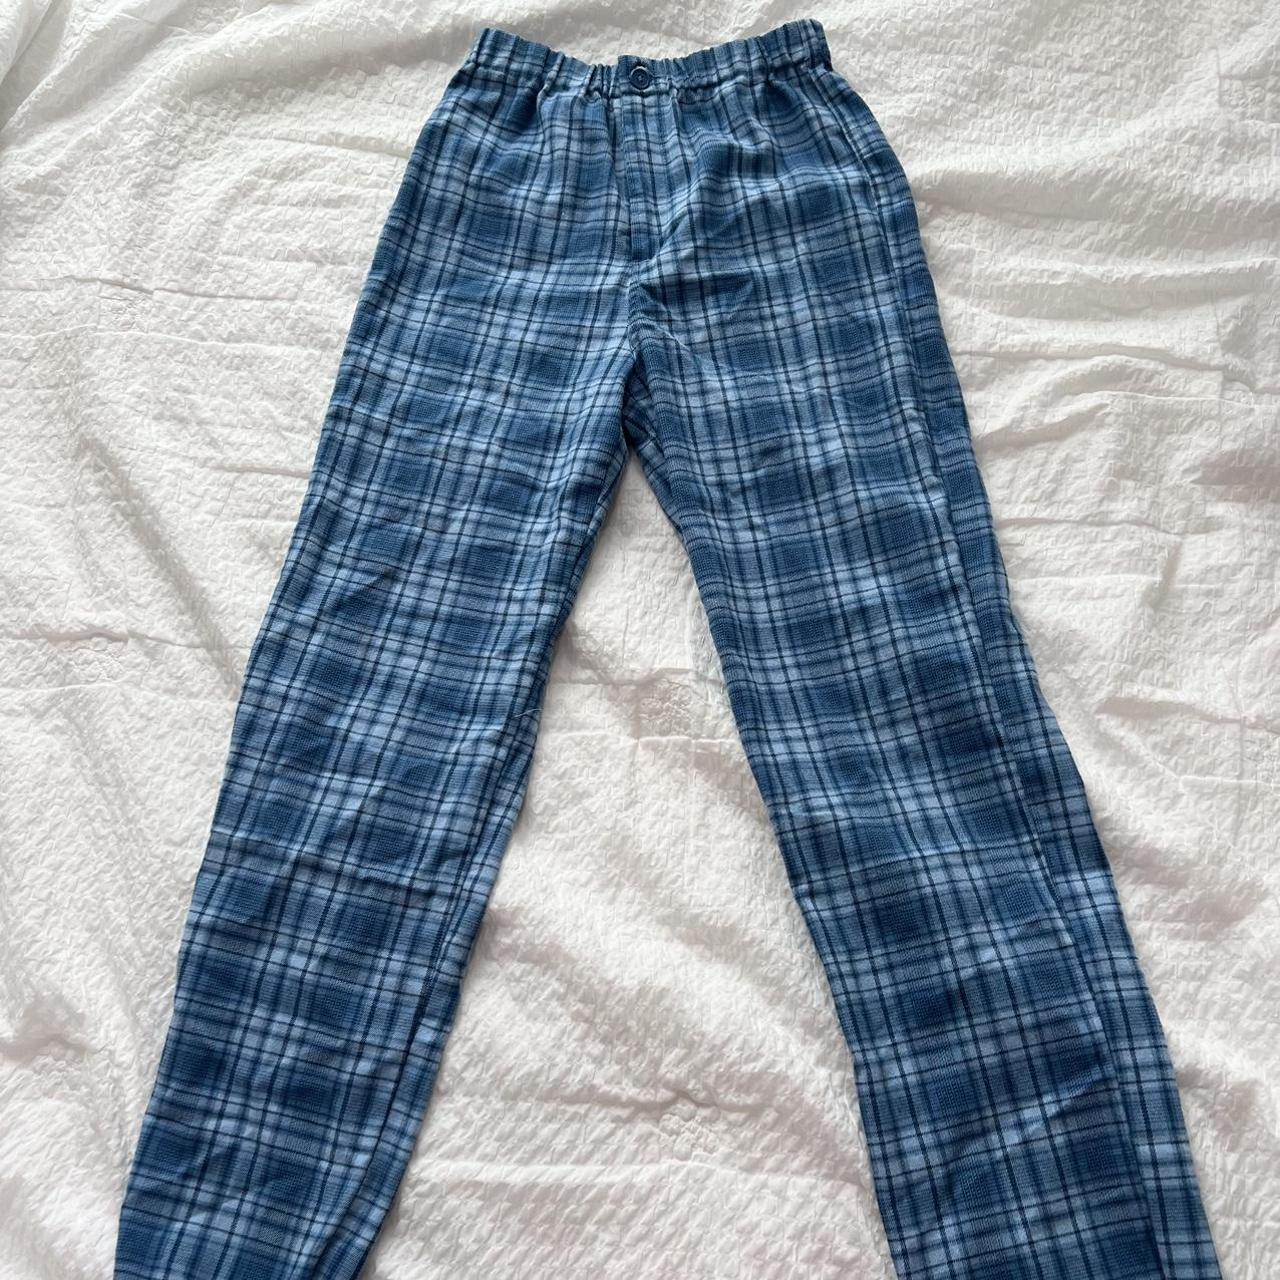 Brandy Melville Plaid pants Soft, cozy, and the... - Depop